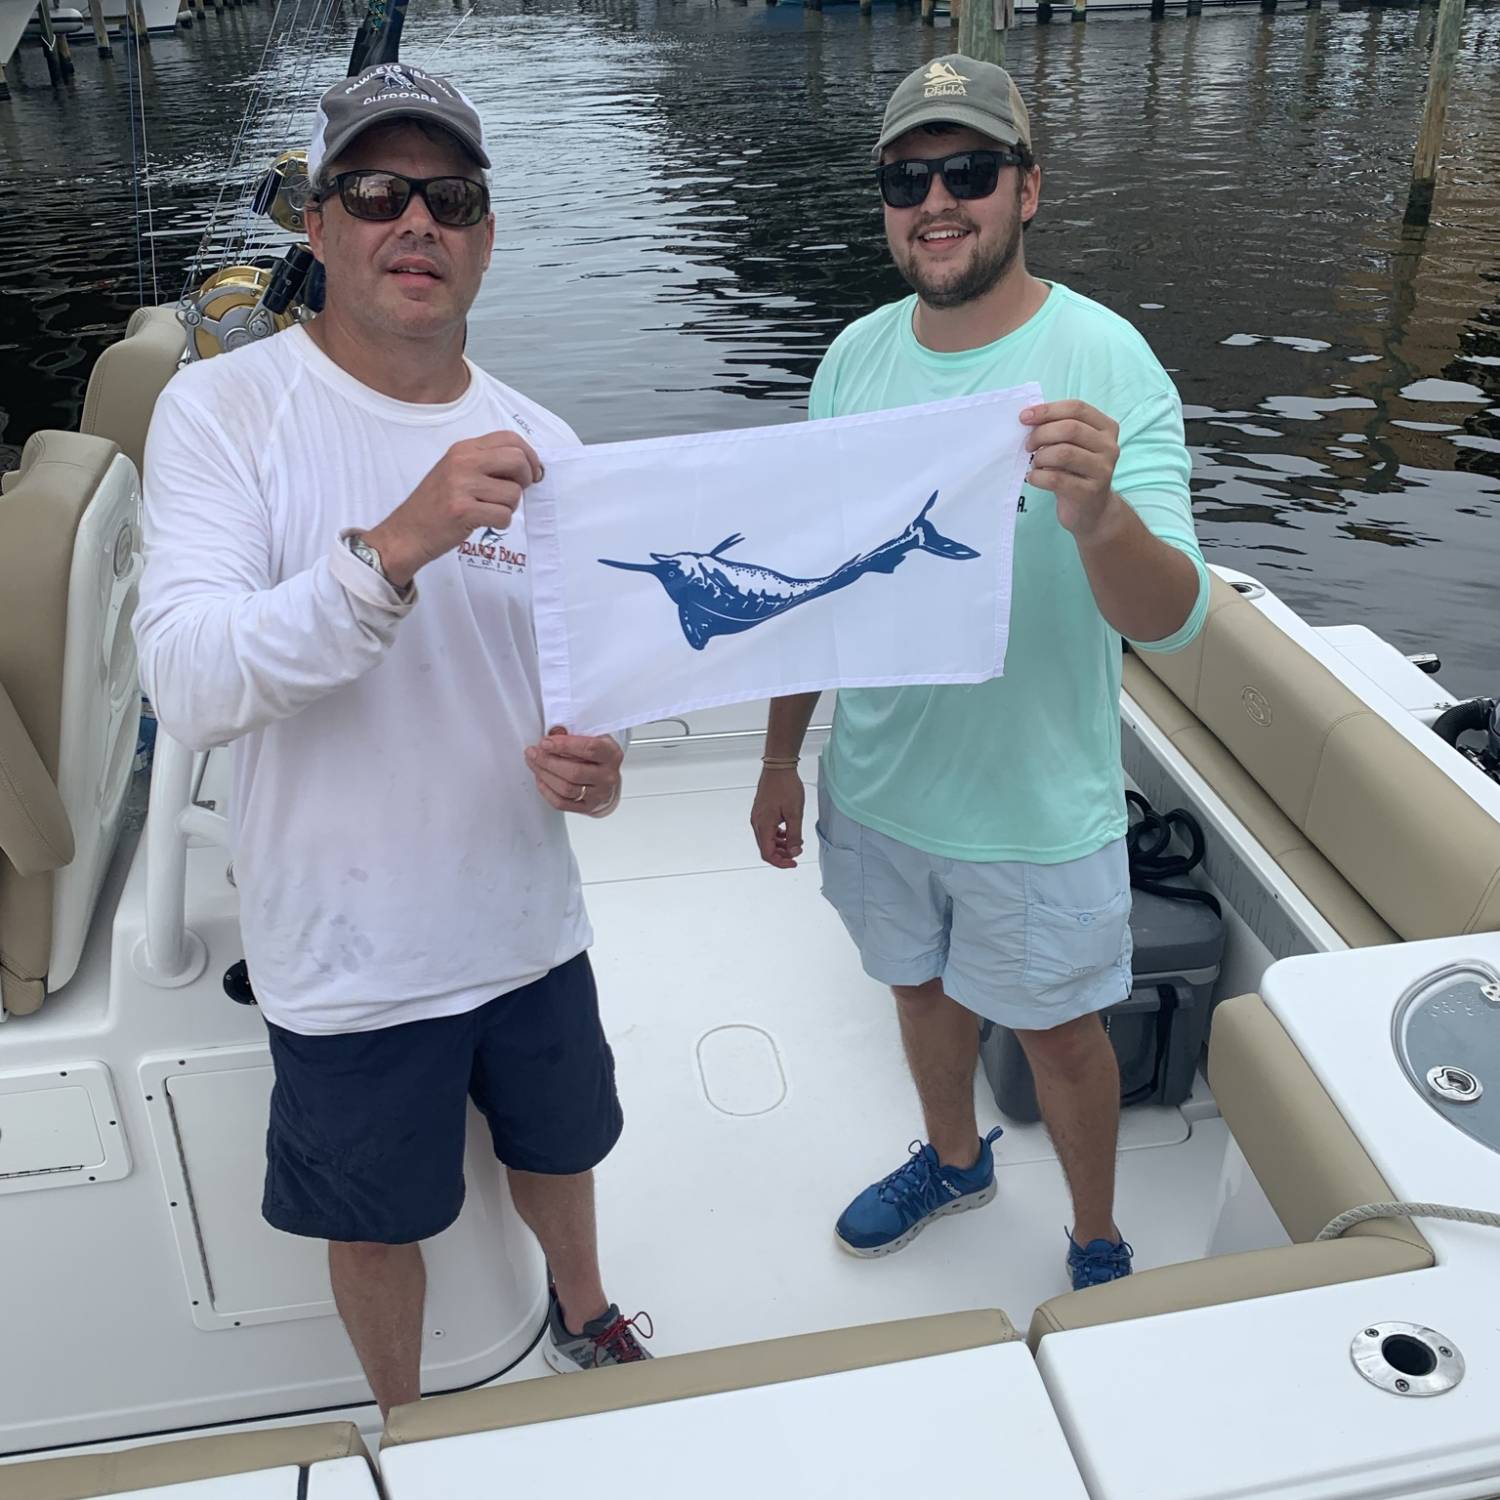 Title: 2 man blue marlin - On board their Sportsman Open 302 Center Console - Location: Orange Beach, Al. Participating in the Photo Contest #SportsmanSeptember2021